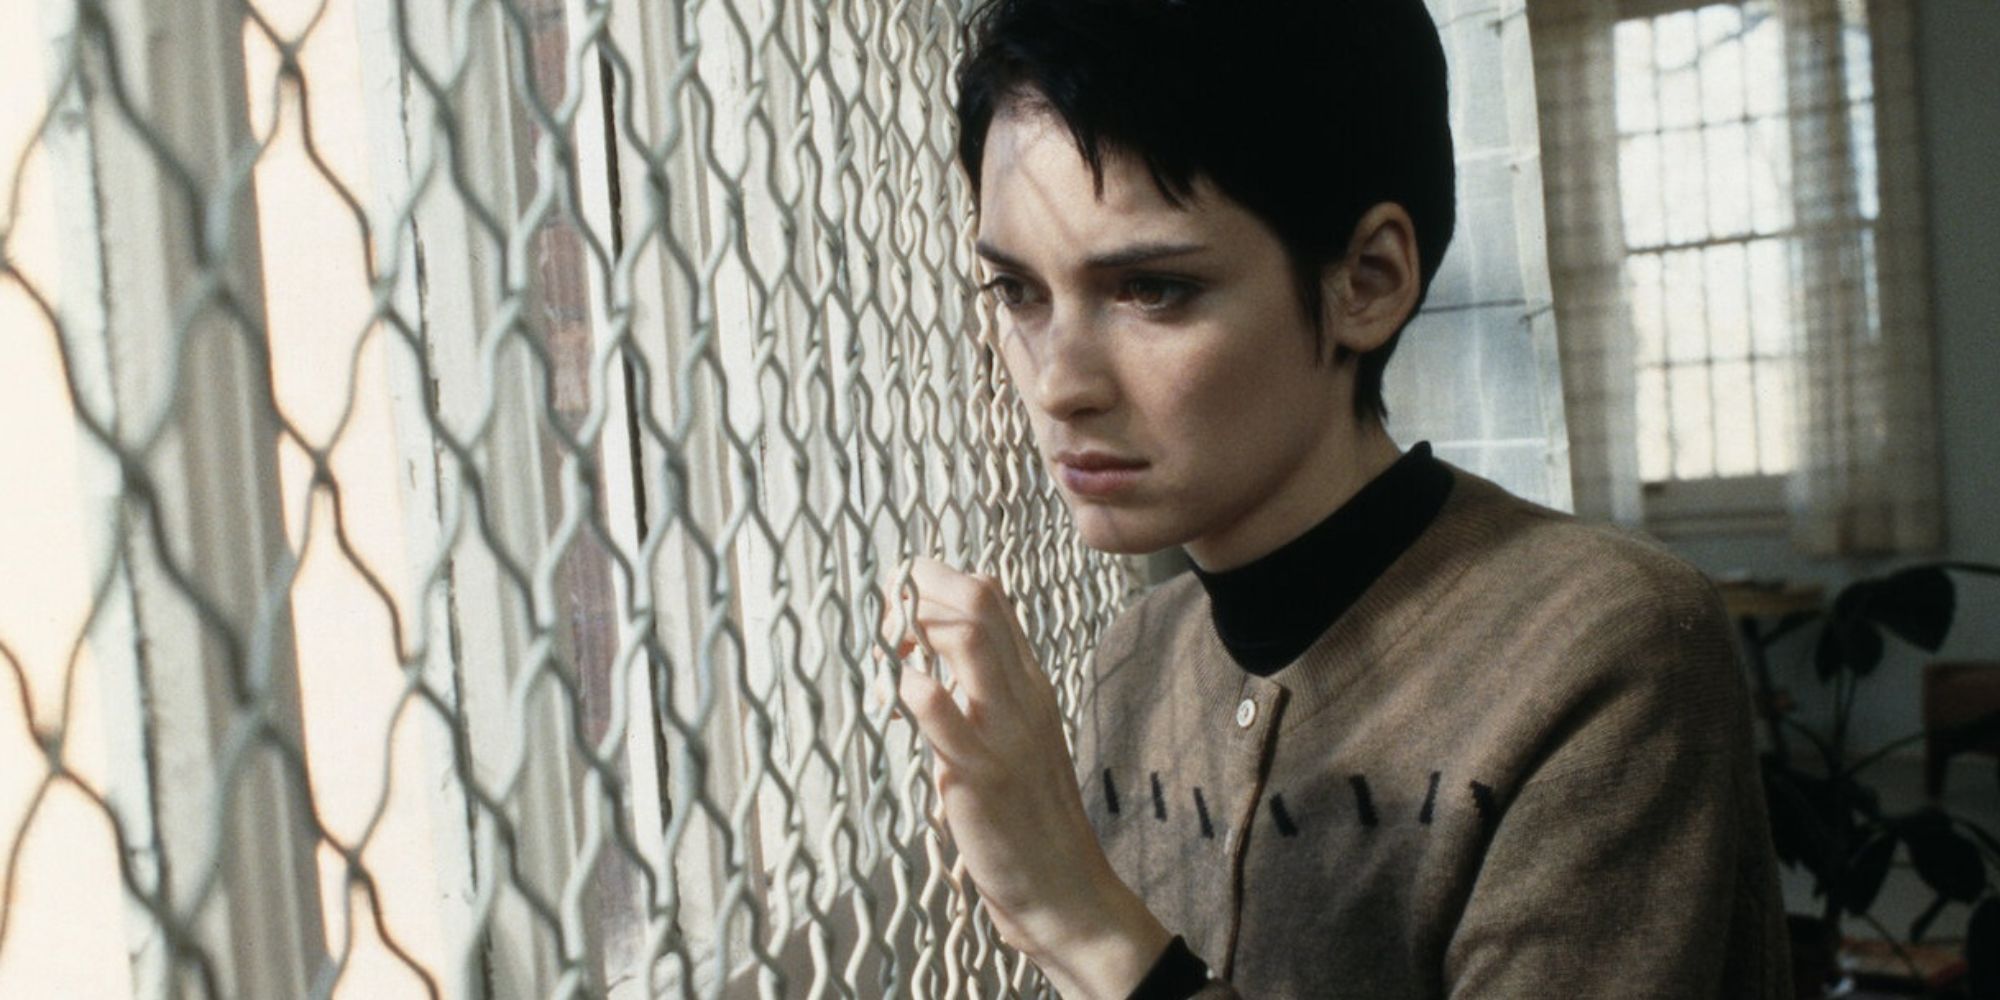 Winona Ryder staring through a wire fence